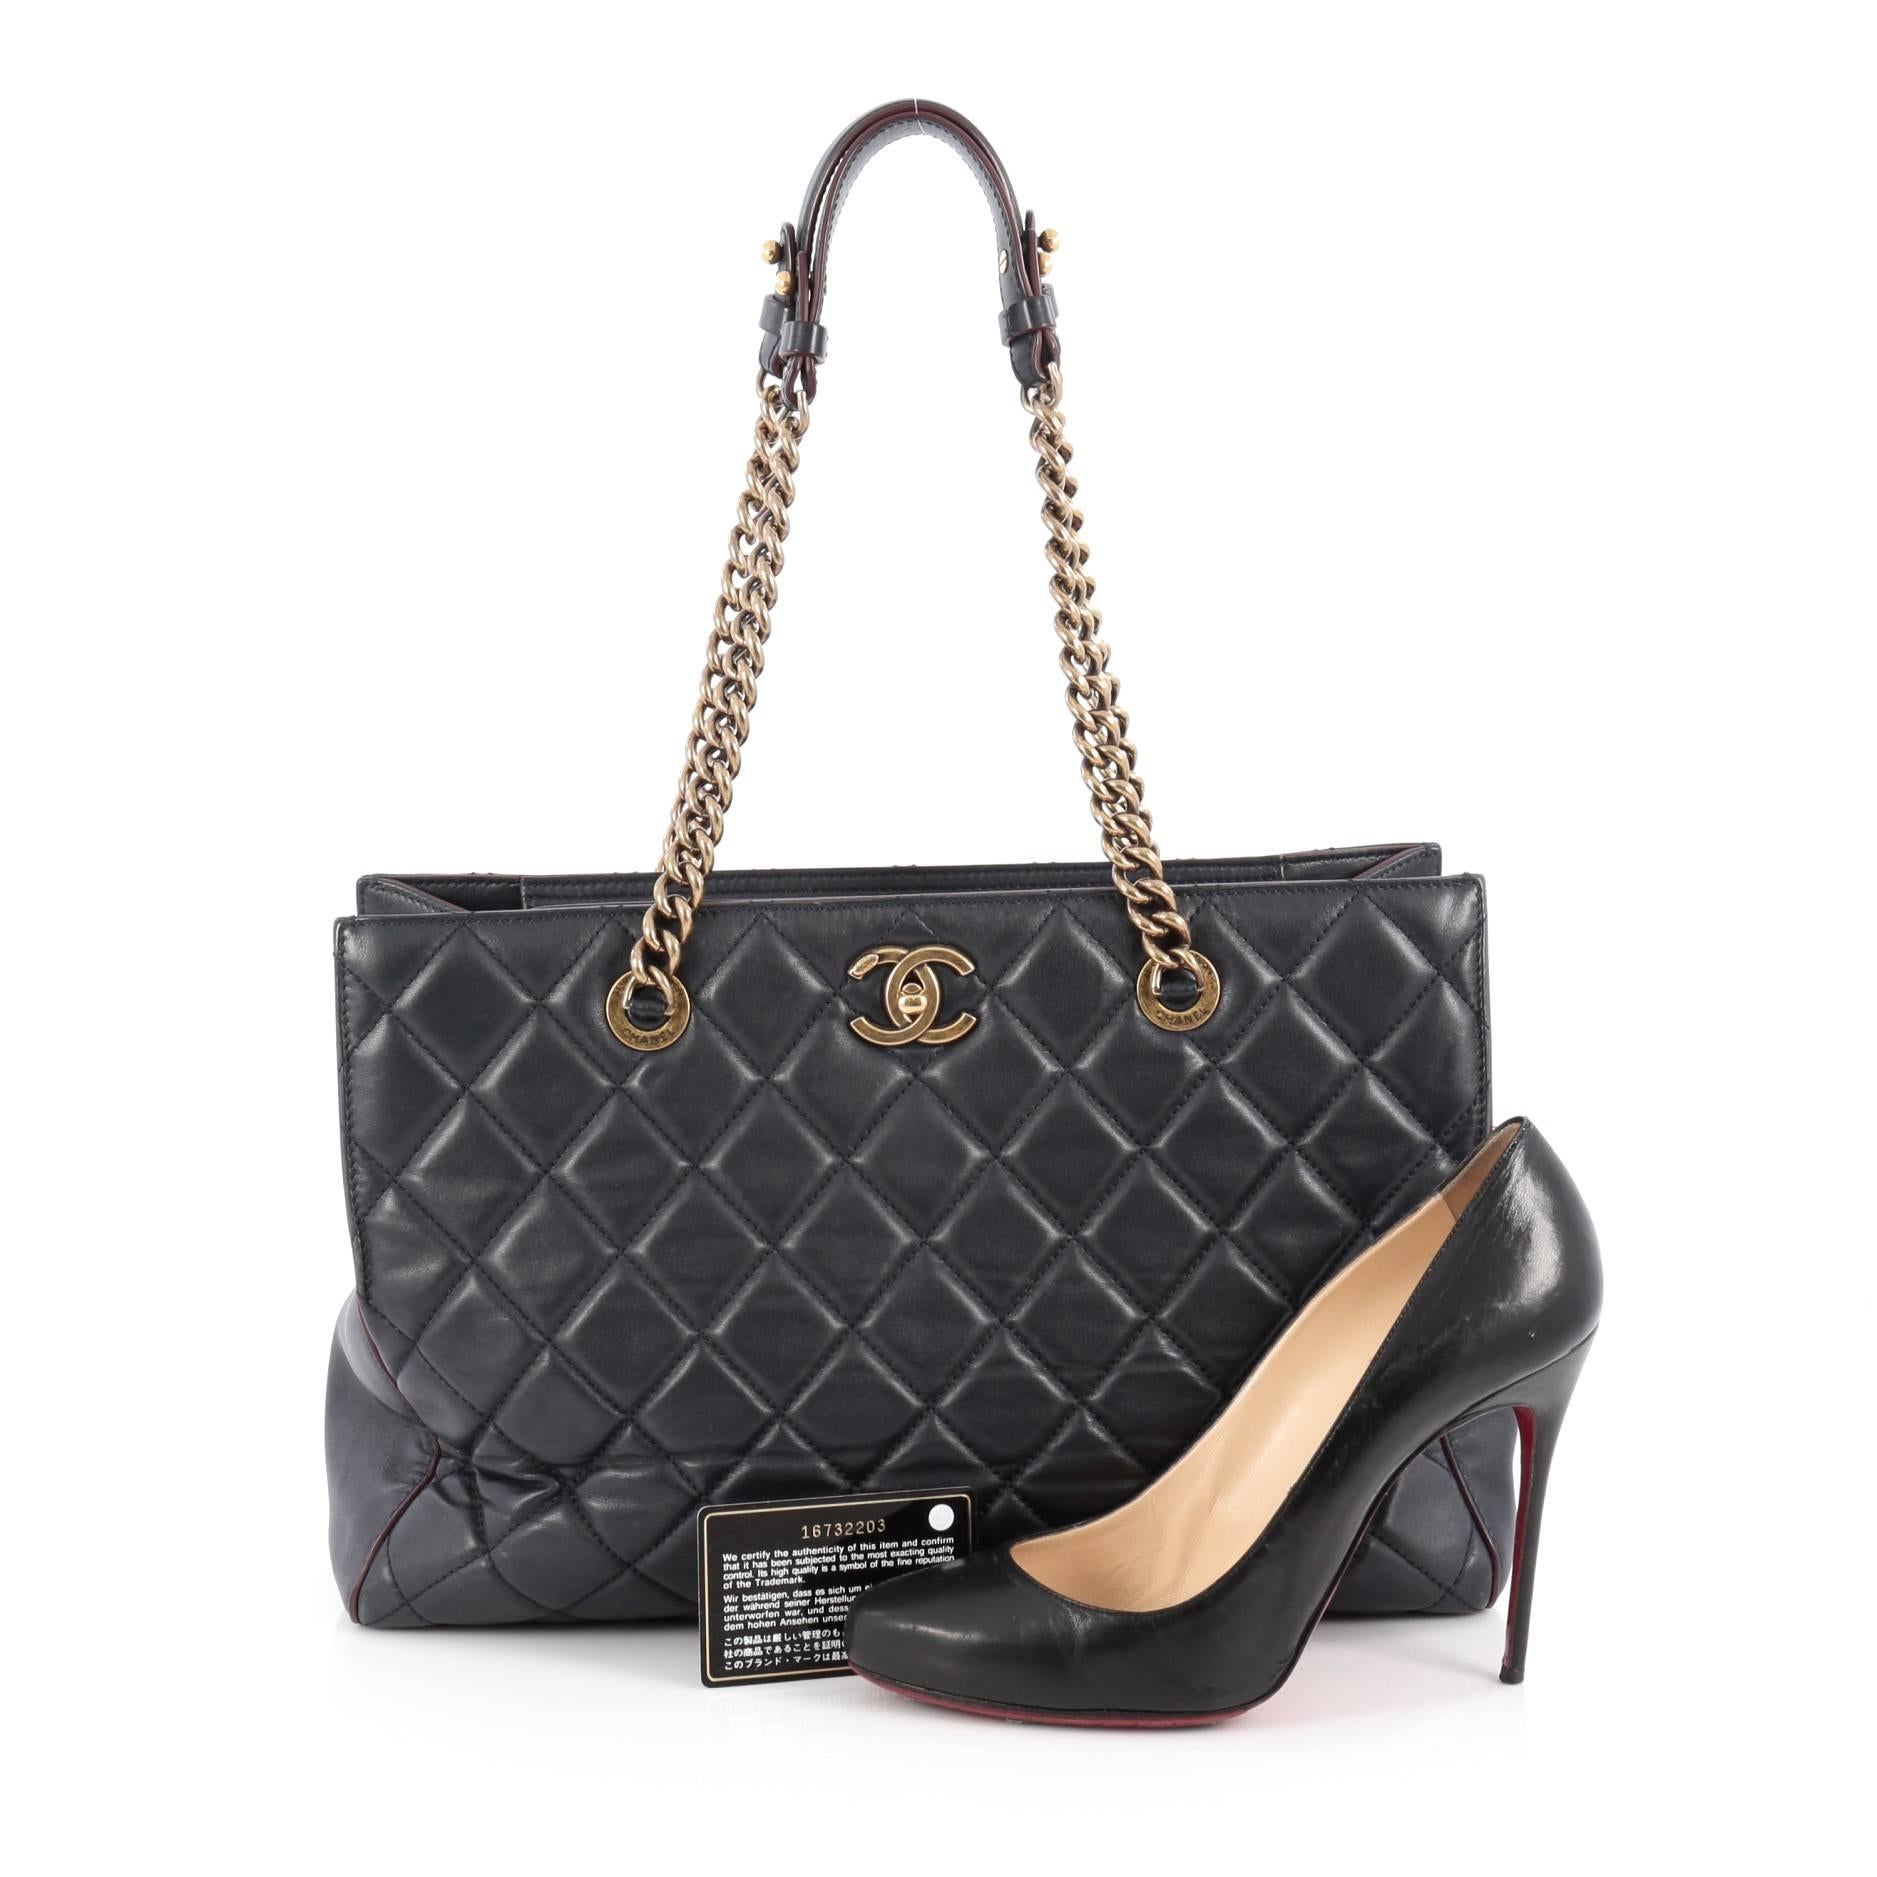 This authentic Chanel Perfect Edge Tote Quilted Leather Large presented in the brand's 2011 Collection mixes modern elegance with youthful edge made for any Chanel lover. Crafted from navy blue leather, this chic tote features dual chunky aged gold